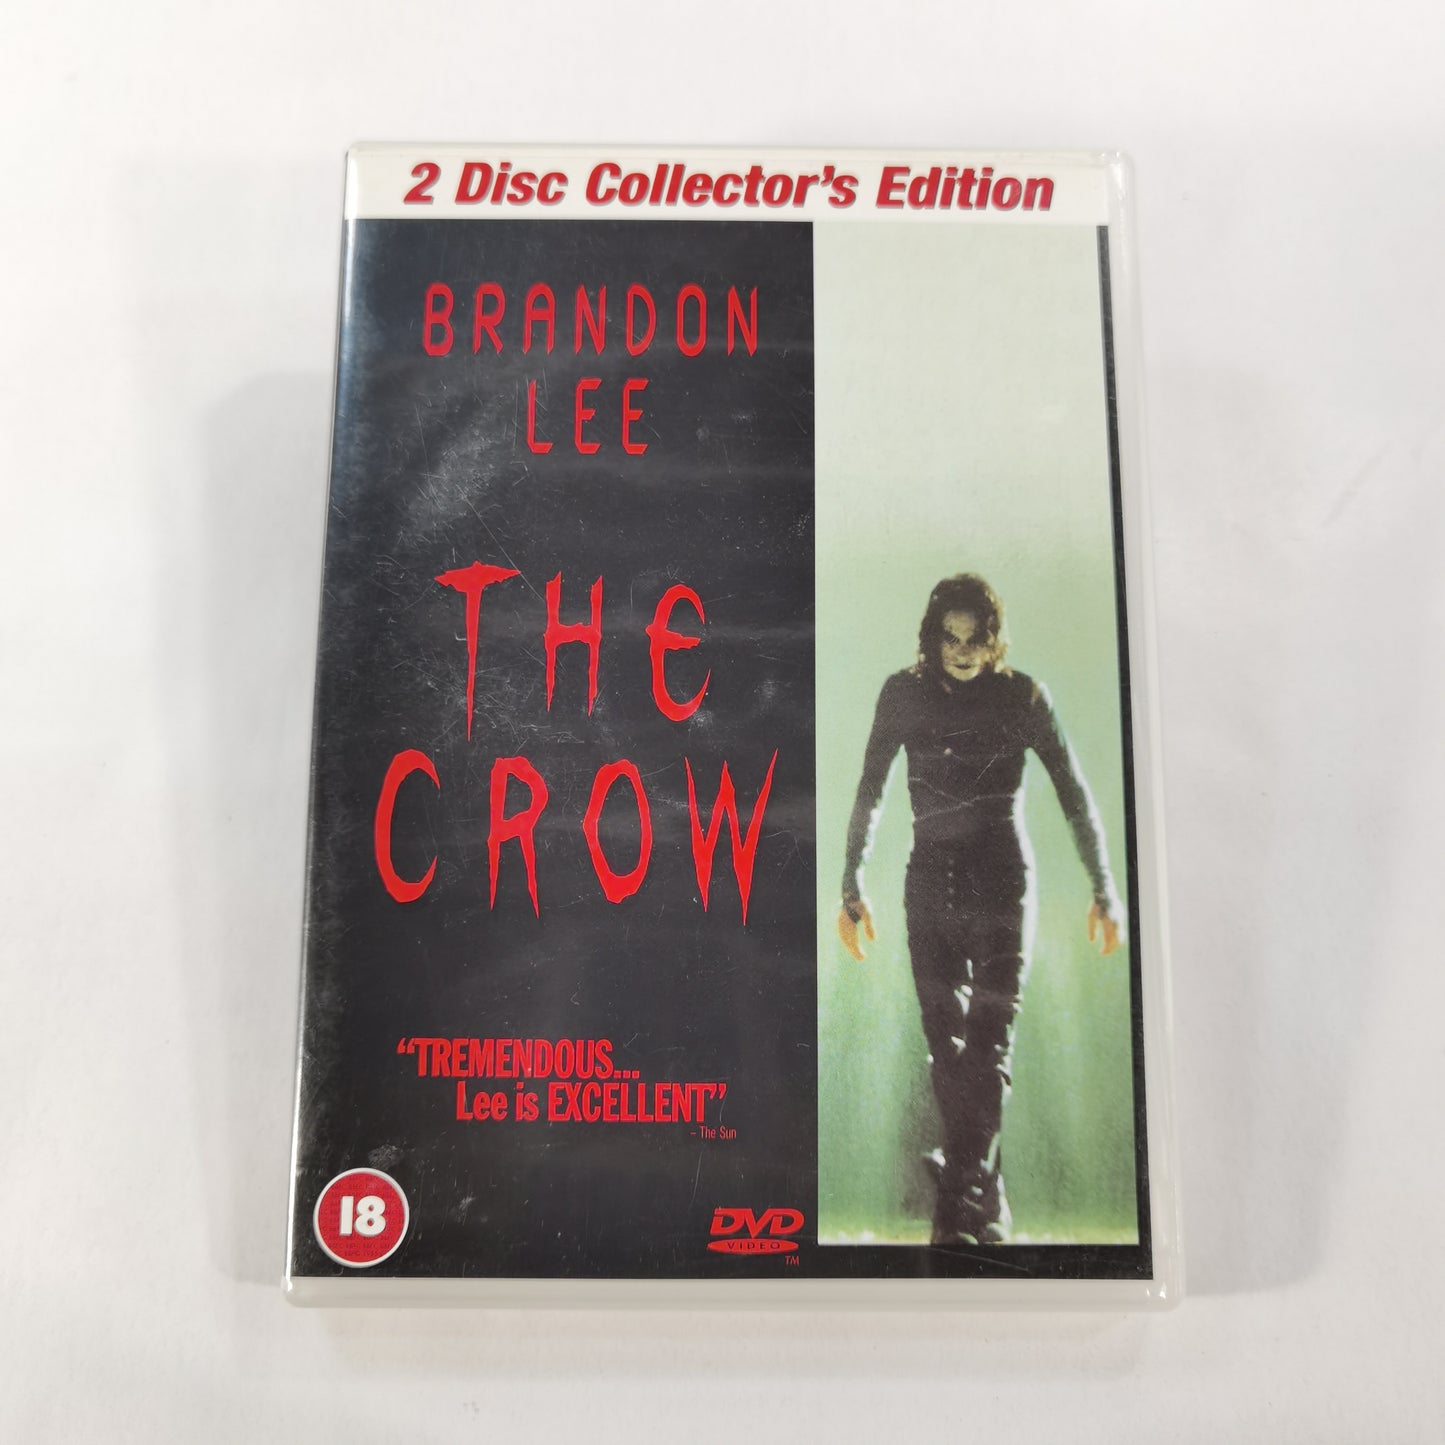 The Crow (1994) - DVD UK 2-Disc Collector's Edition